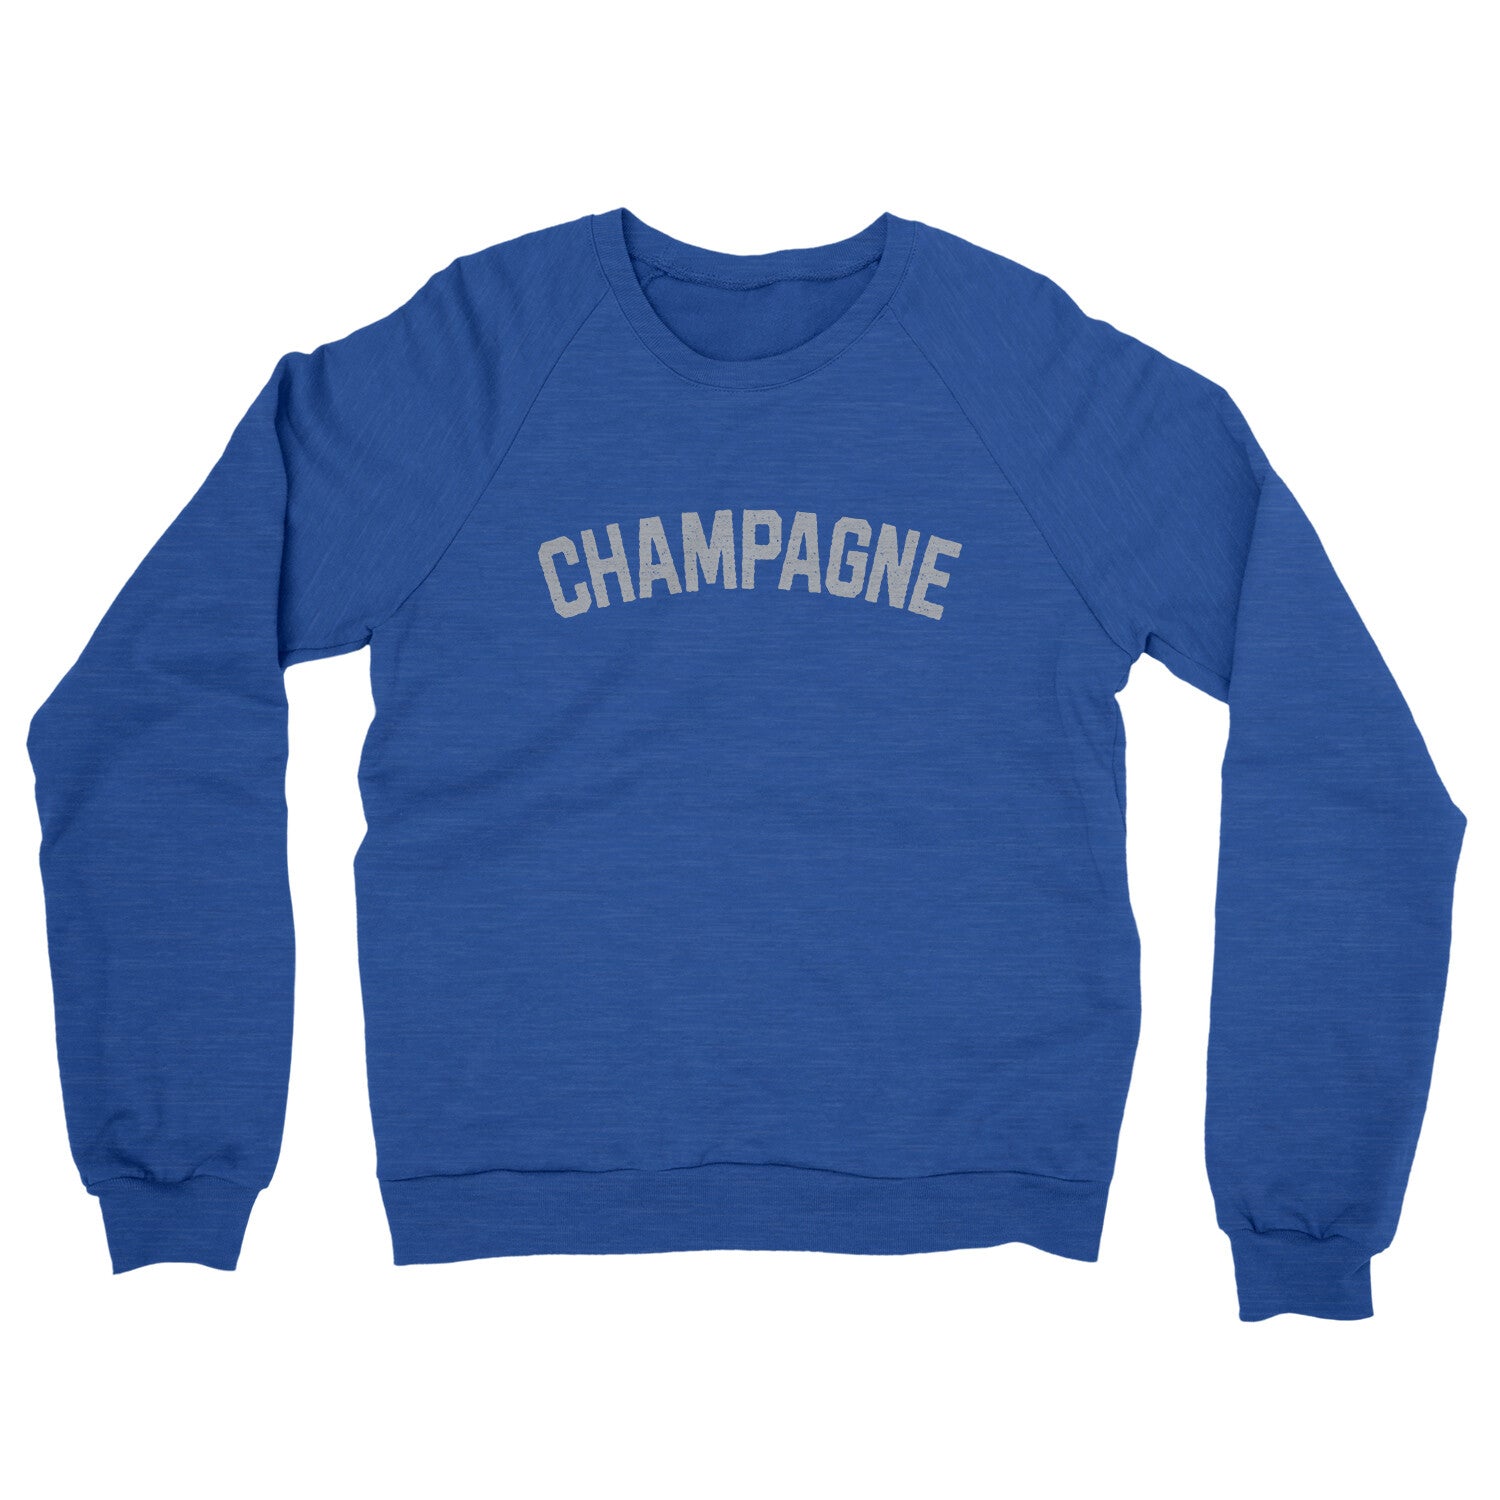 Champagne in Heather Royal Color